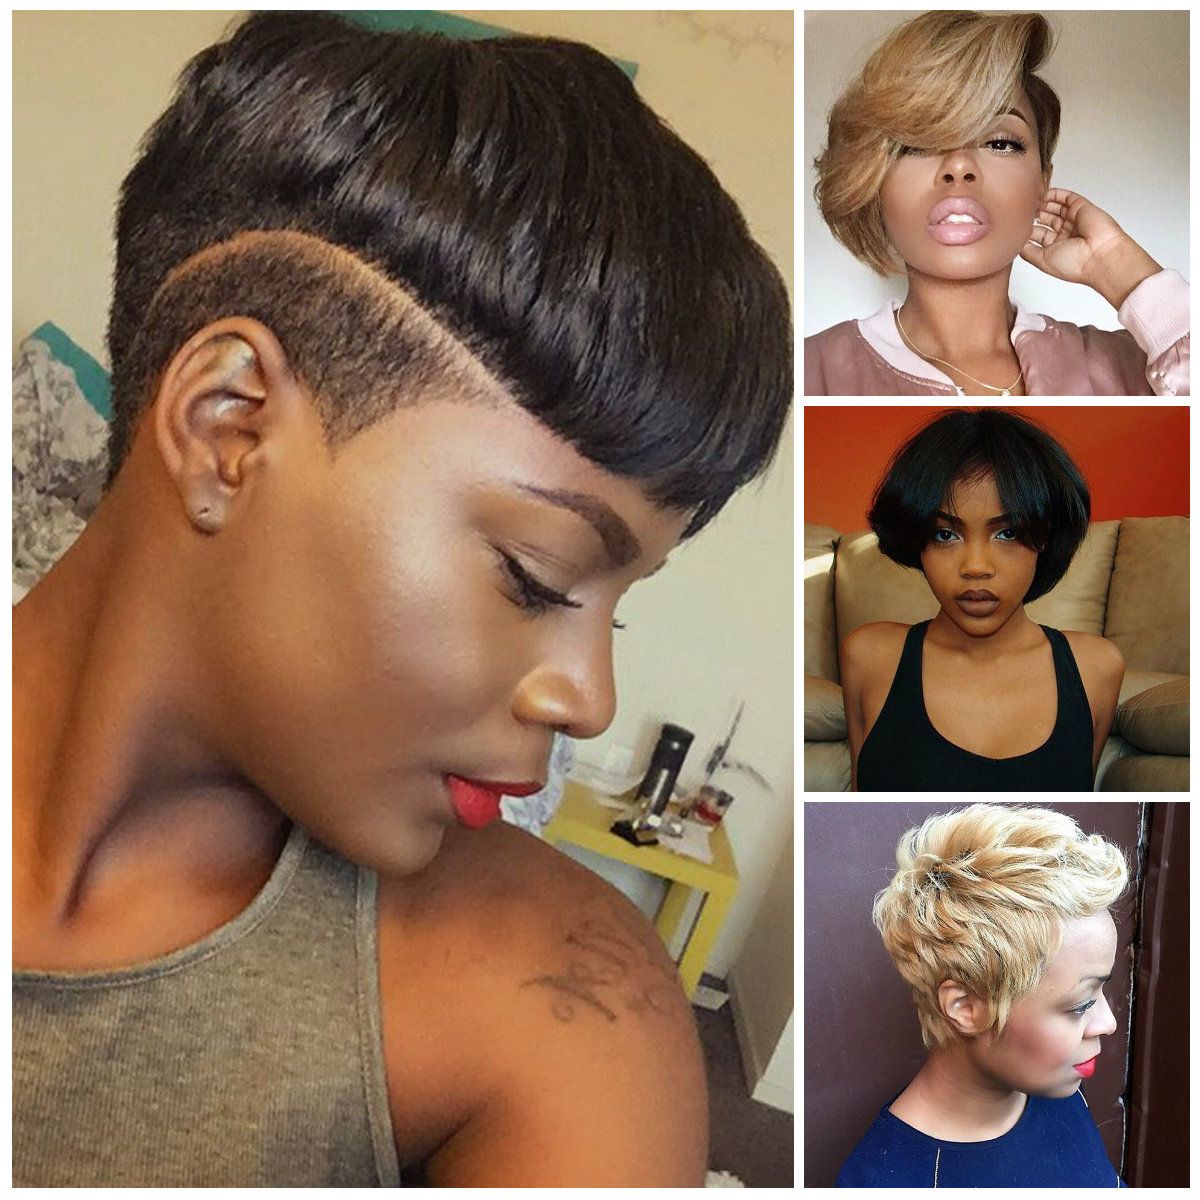 2017 Upscale Short Haircuts For Black Women | 2019 Haircuts In Short Hairstyles With Color For Black Women (View 5 of 25)